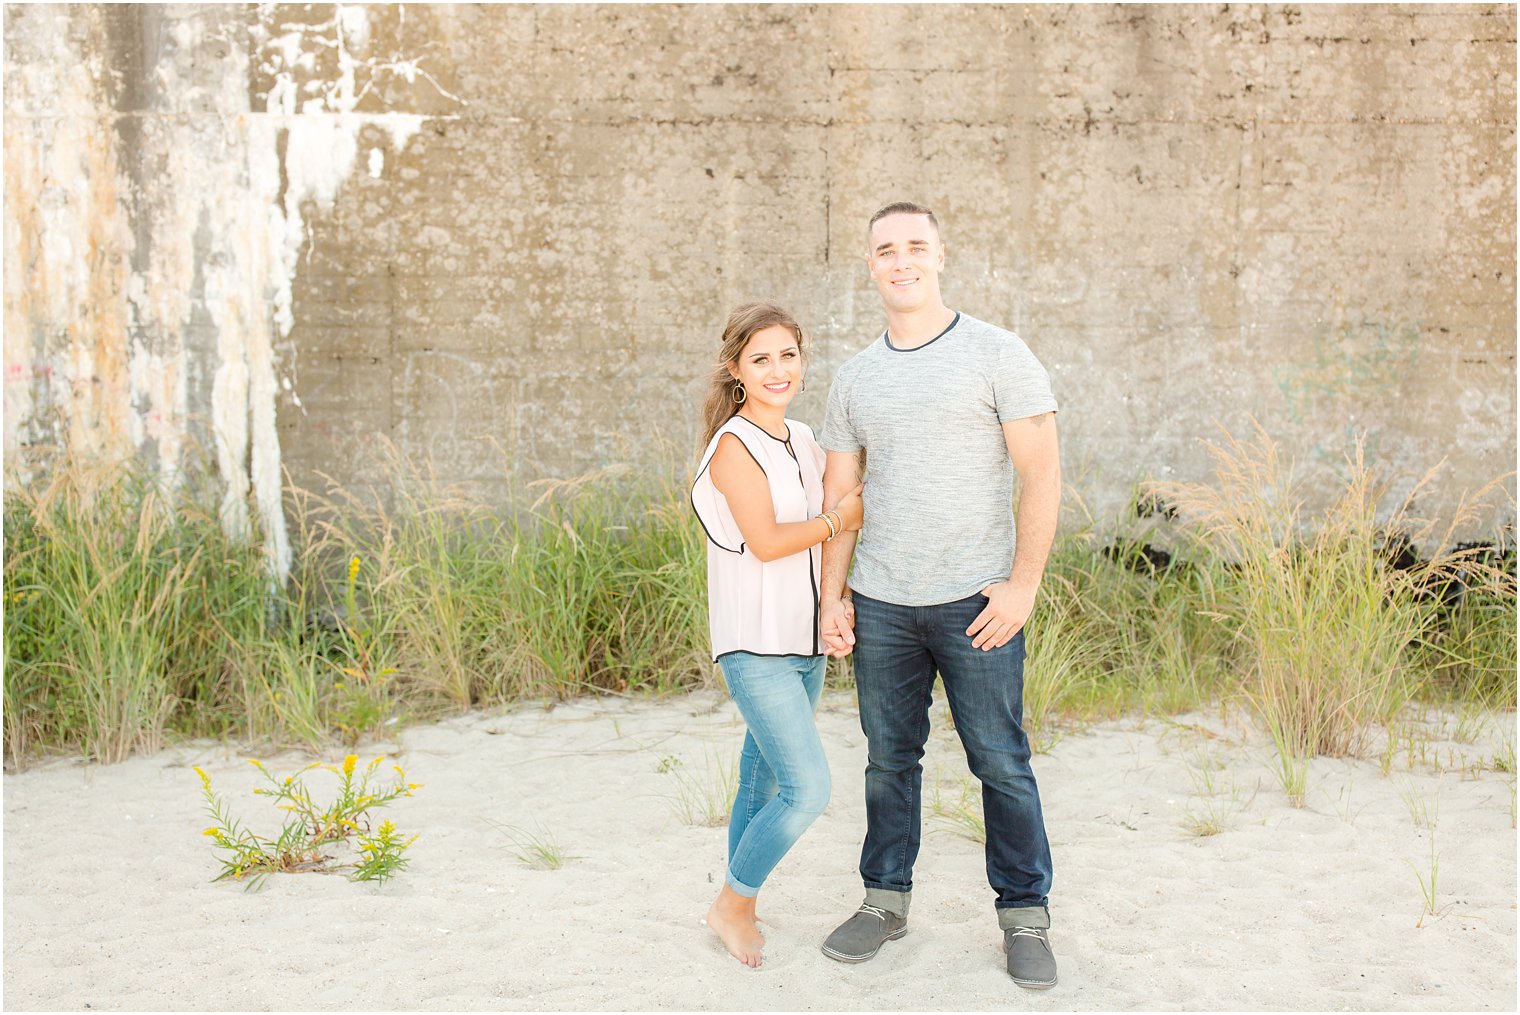 Trendy outfits for engagement session | Photos by Idalia Photography